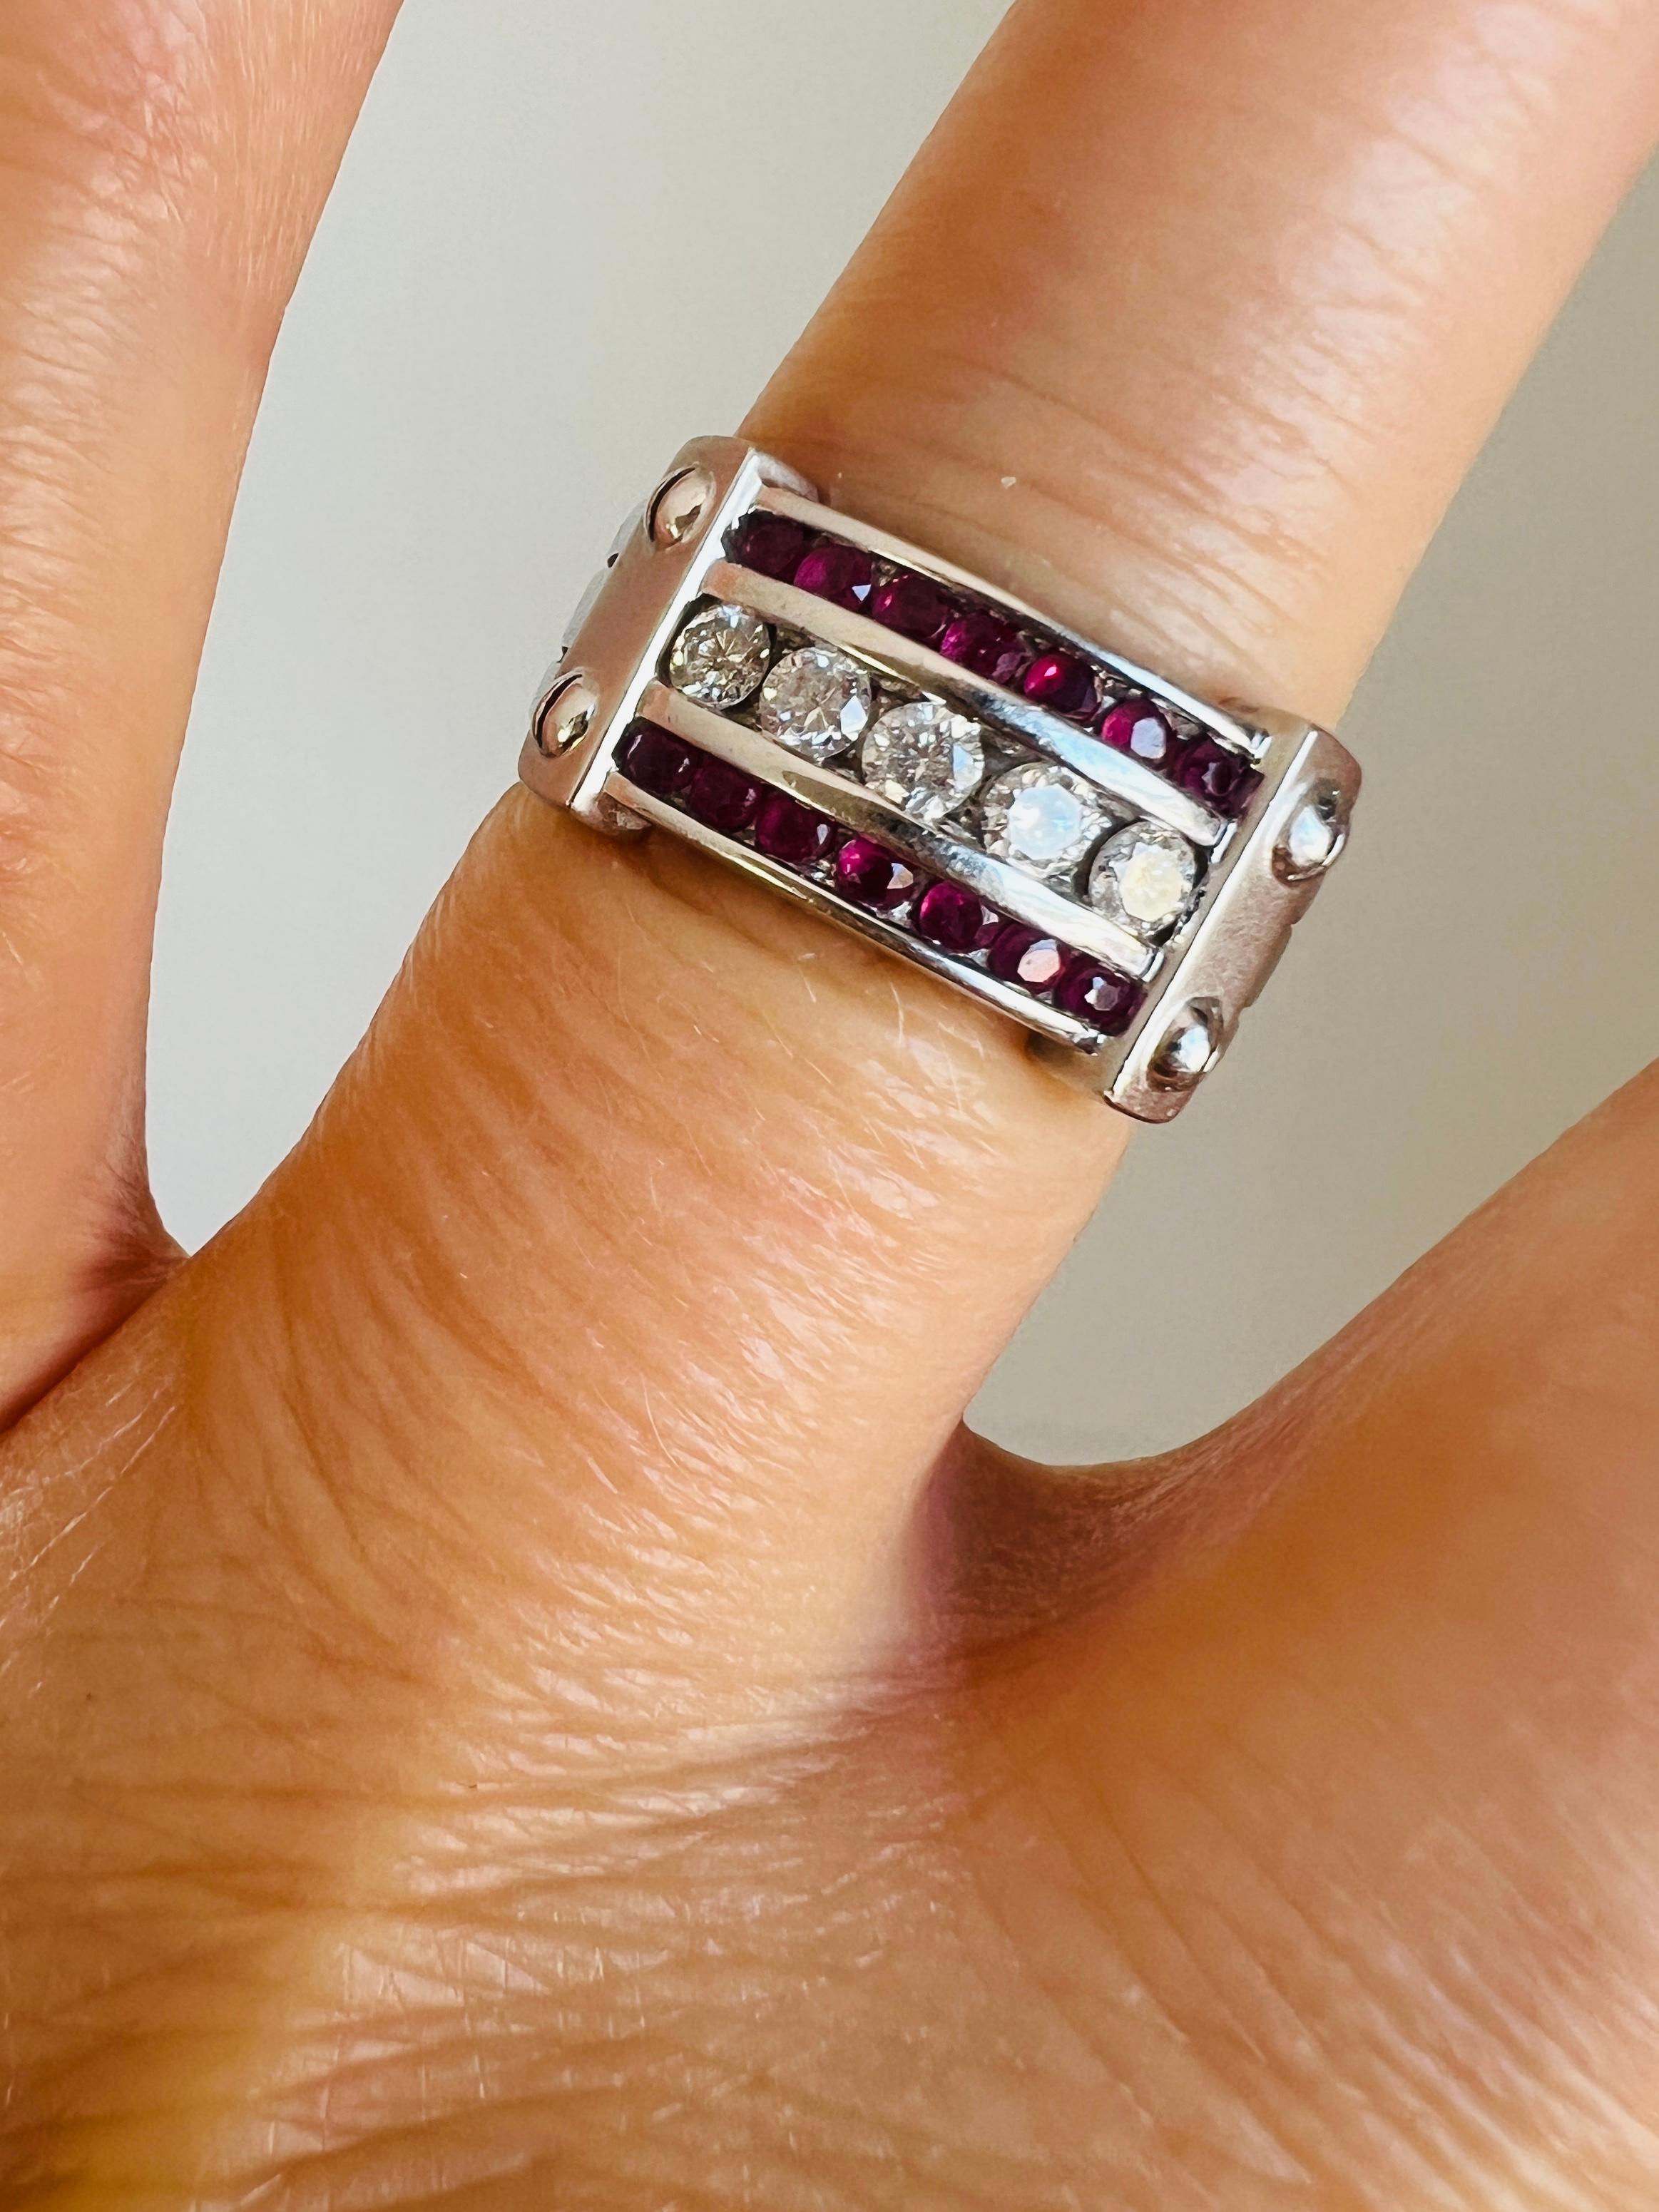 Retro Vintage 18k White Gold Ruby Diamond Ring In Good Condition For Sale In Sausalito, CA